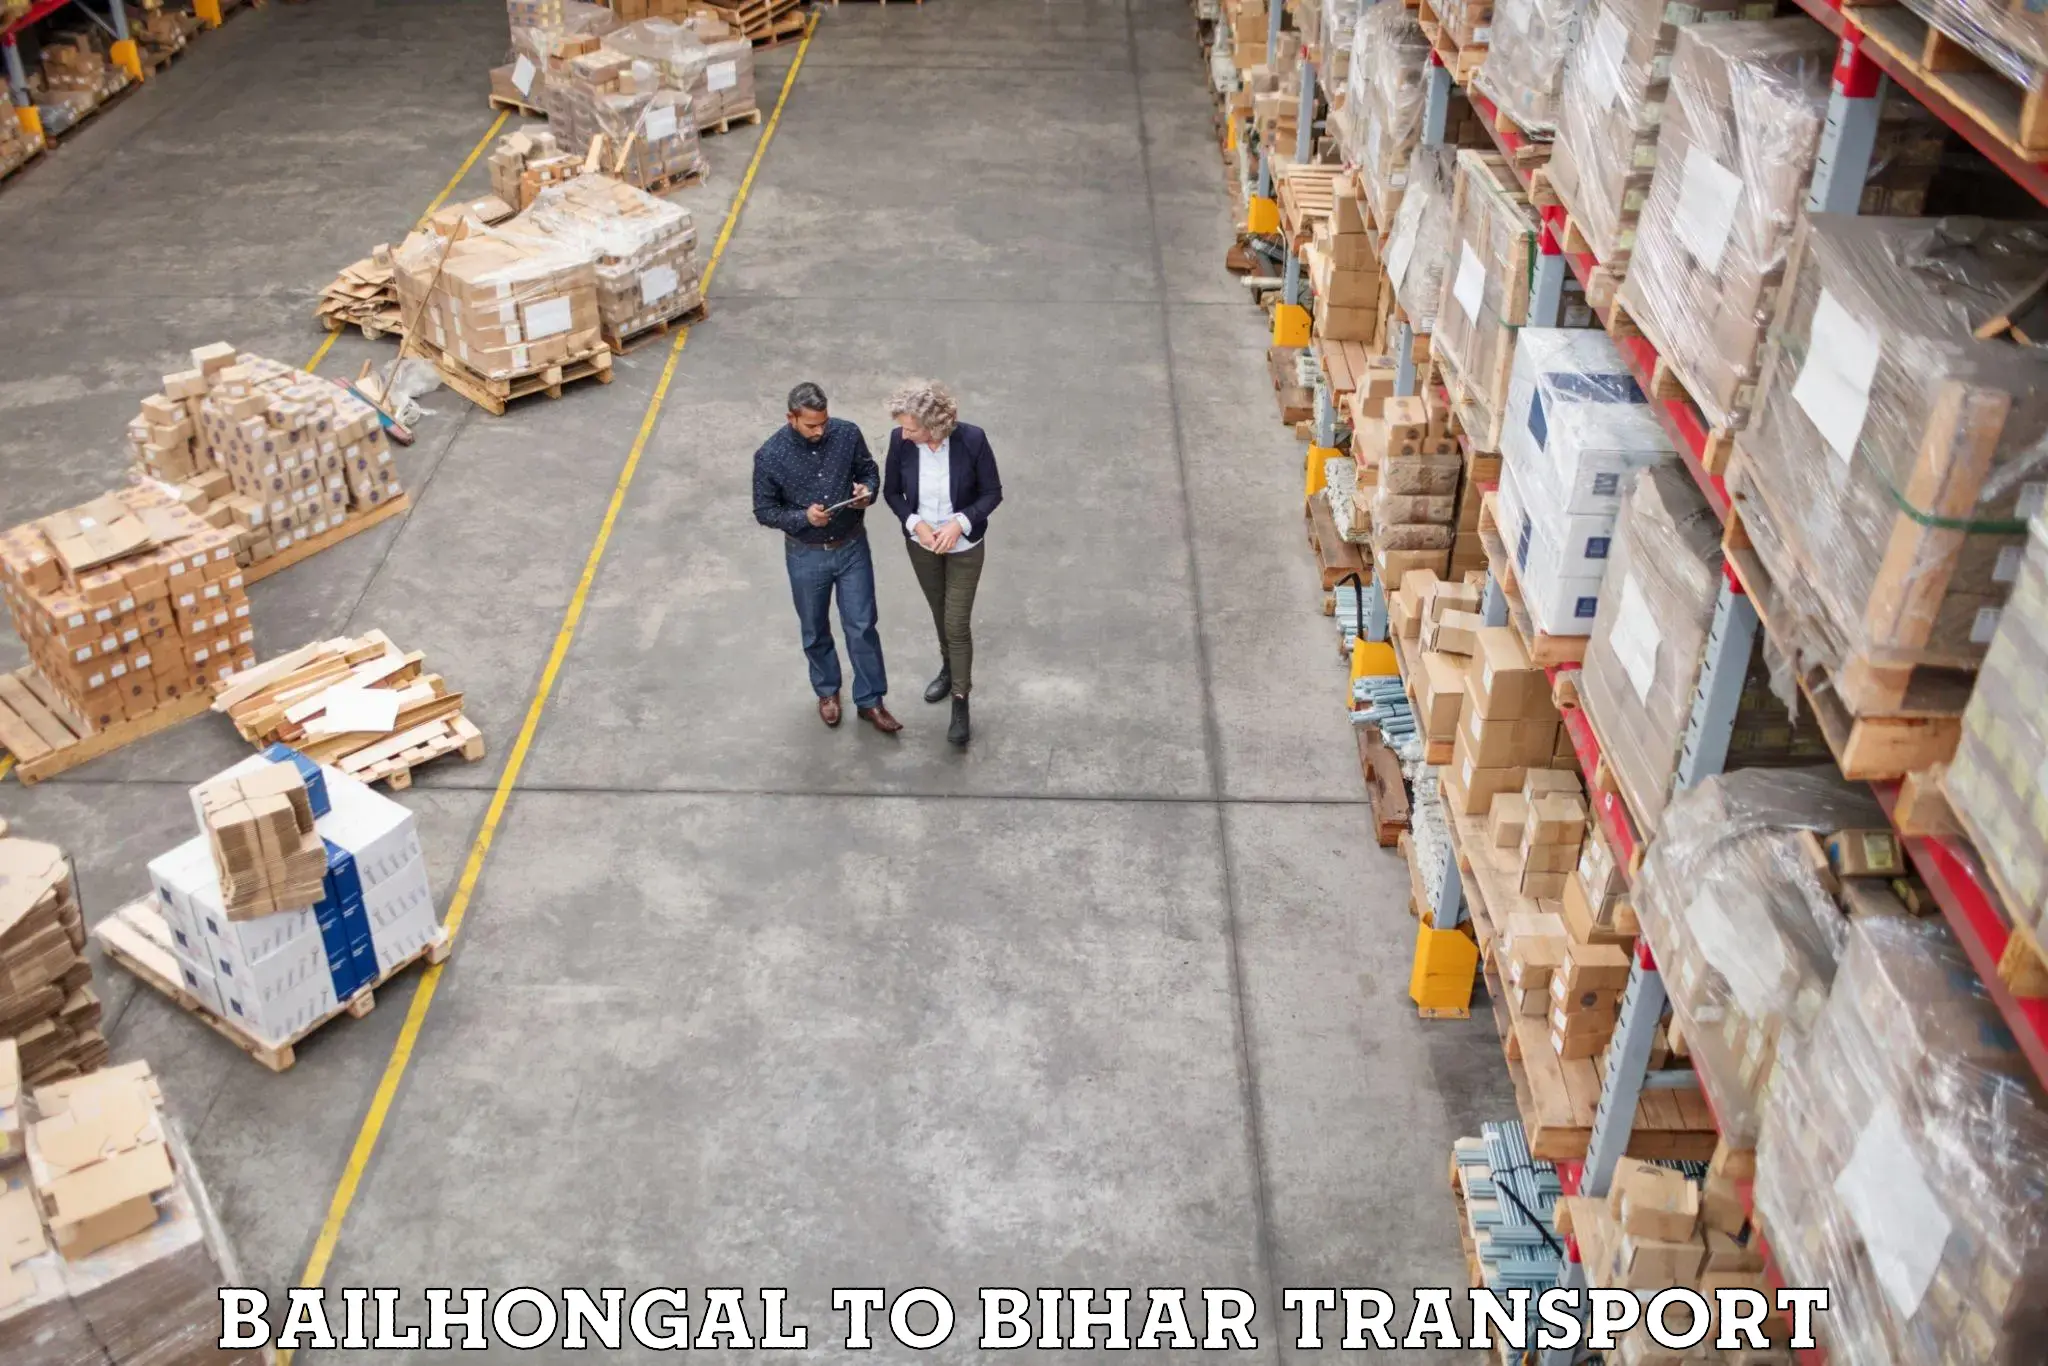 Part load transport service in India Bailhongal to Bihar